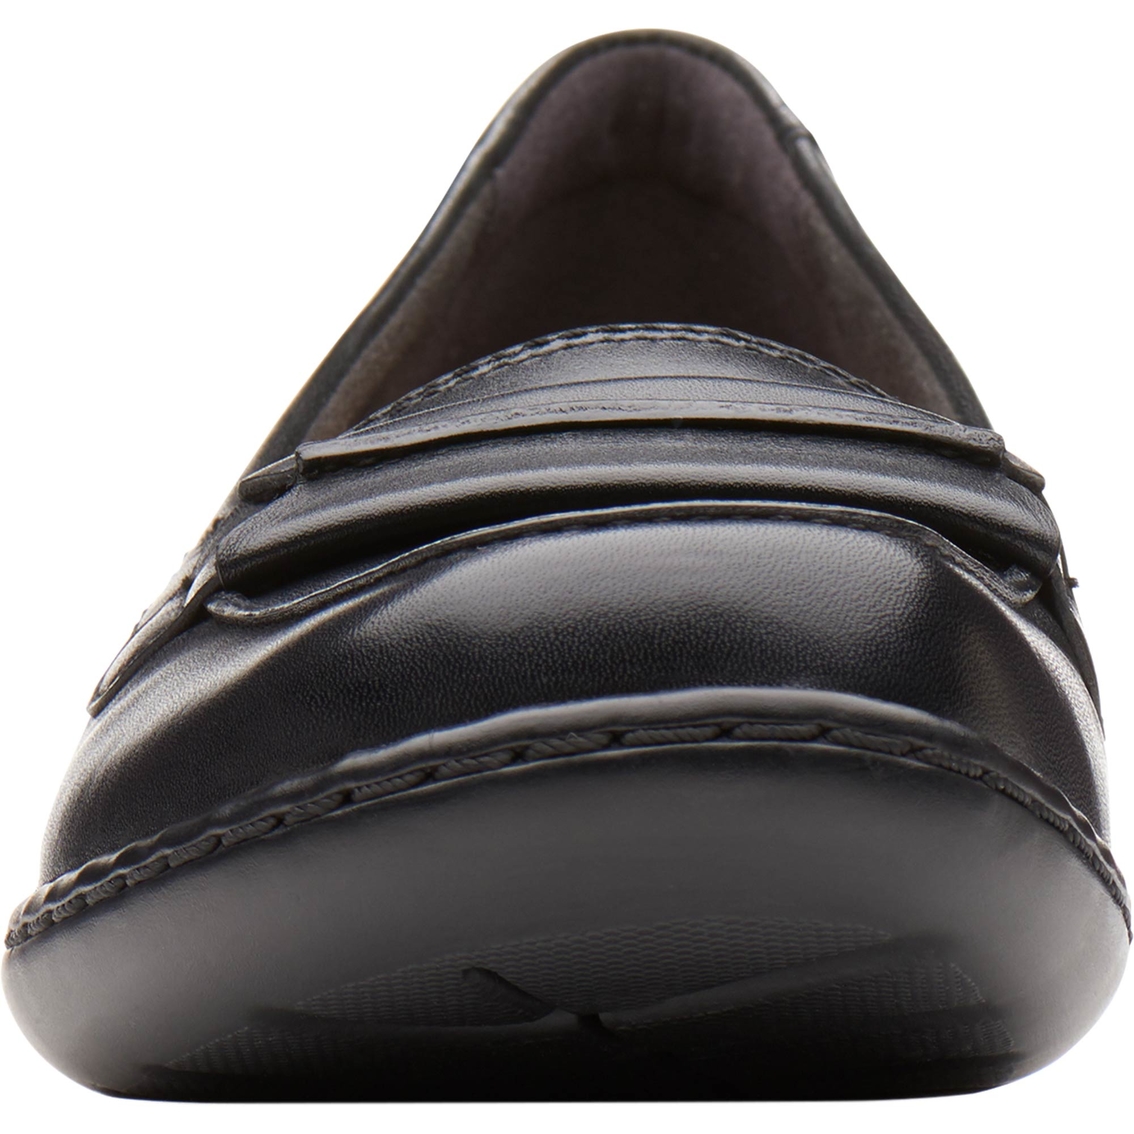 Clarks Ashland Lily Loafers - Image 4 of 6